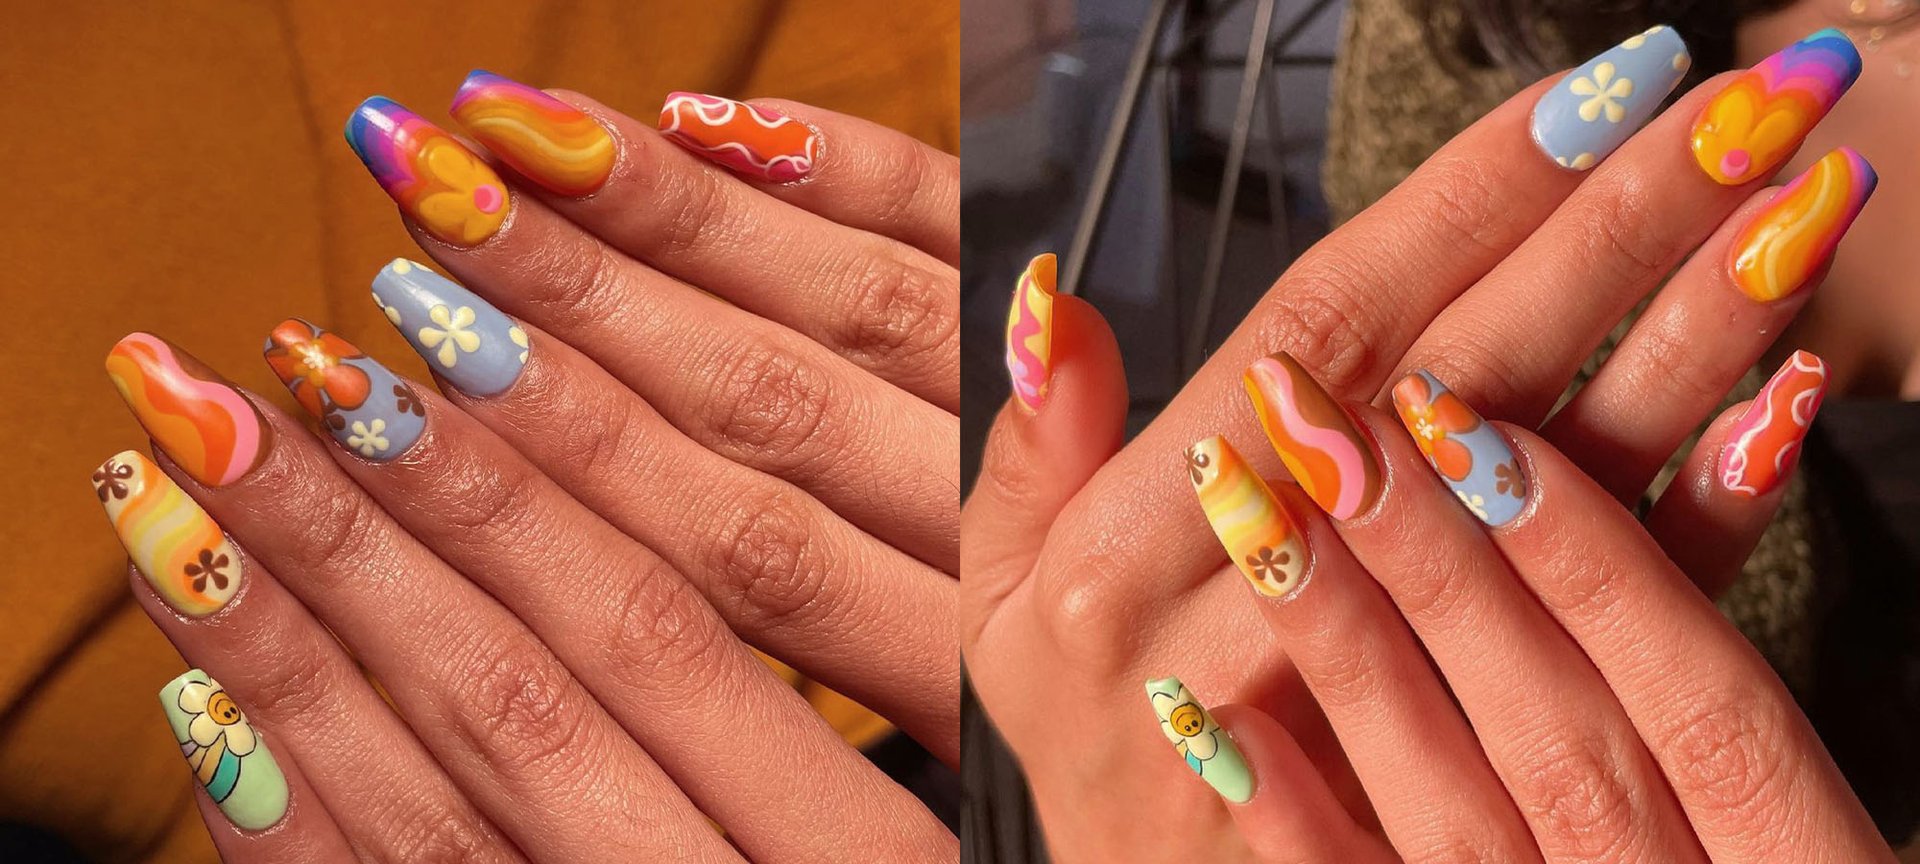 Acrylic Nail Art To Pair With Your Halloween Costume